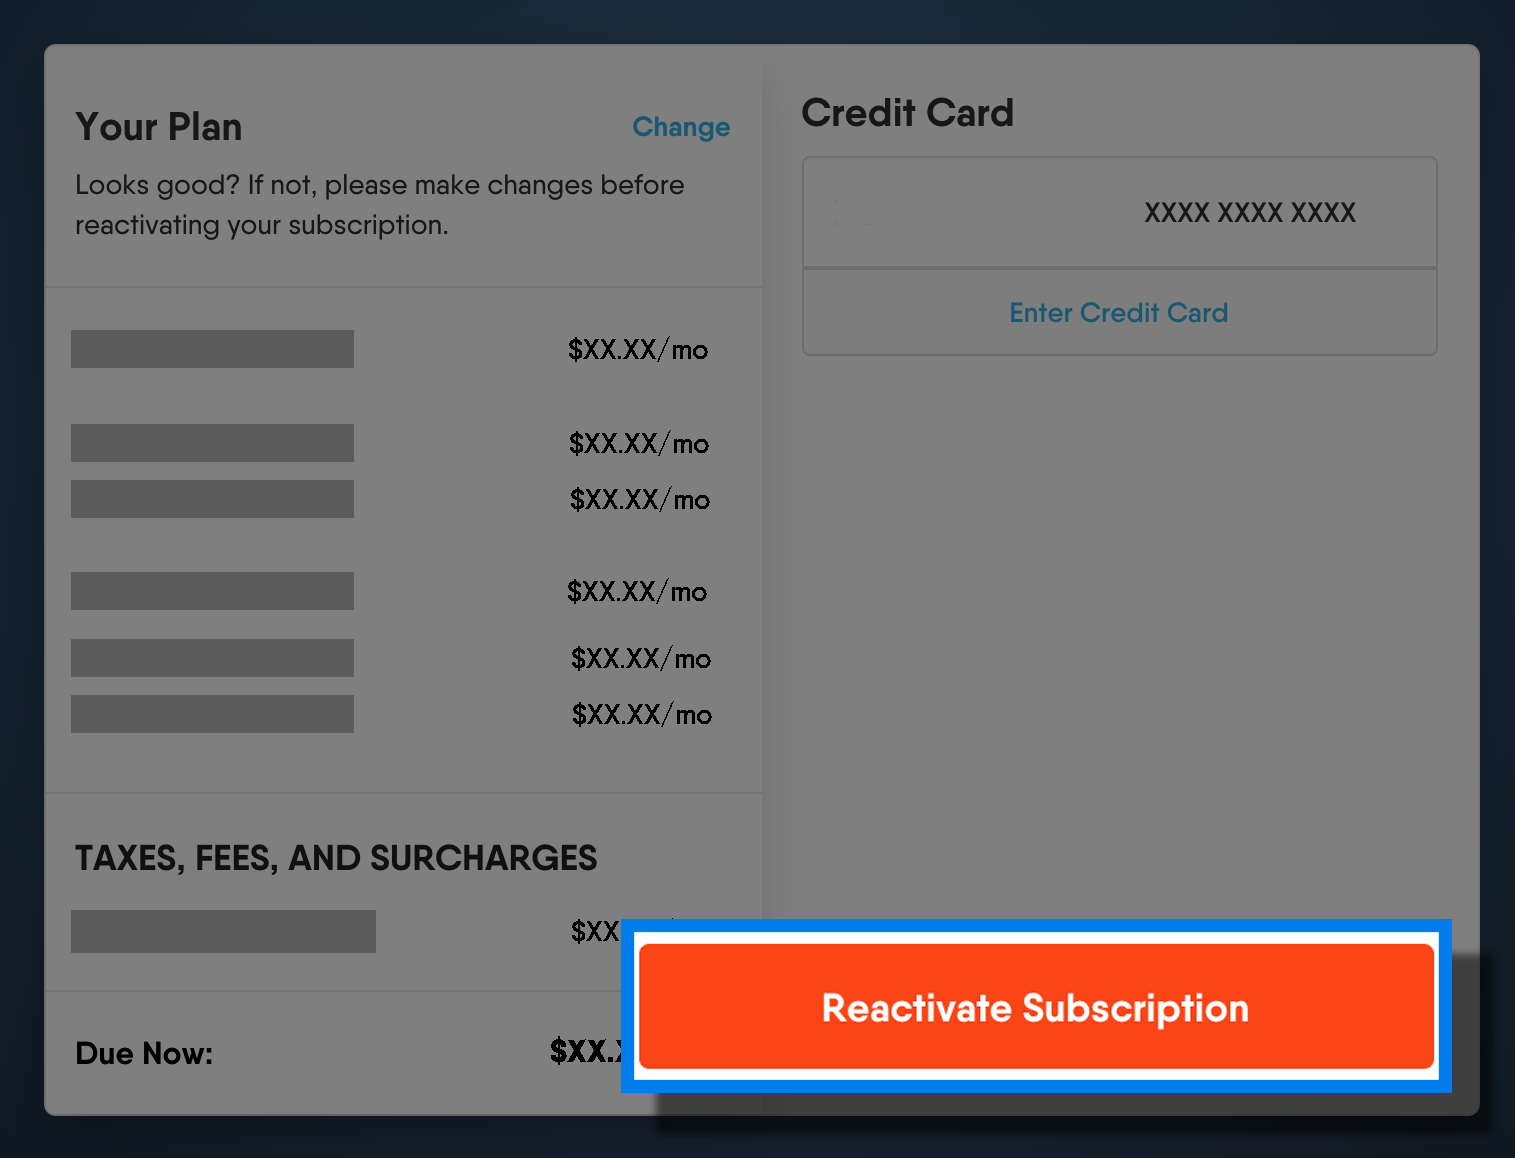 FuboTV YOUR PLAN overview with REACTIVATE SUBSCRIPTION button highlighted